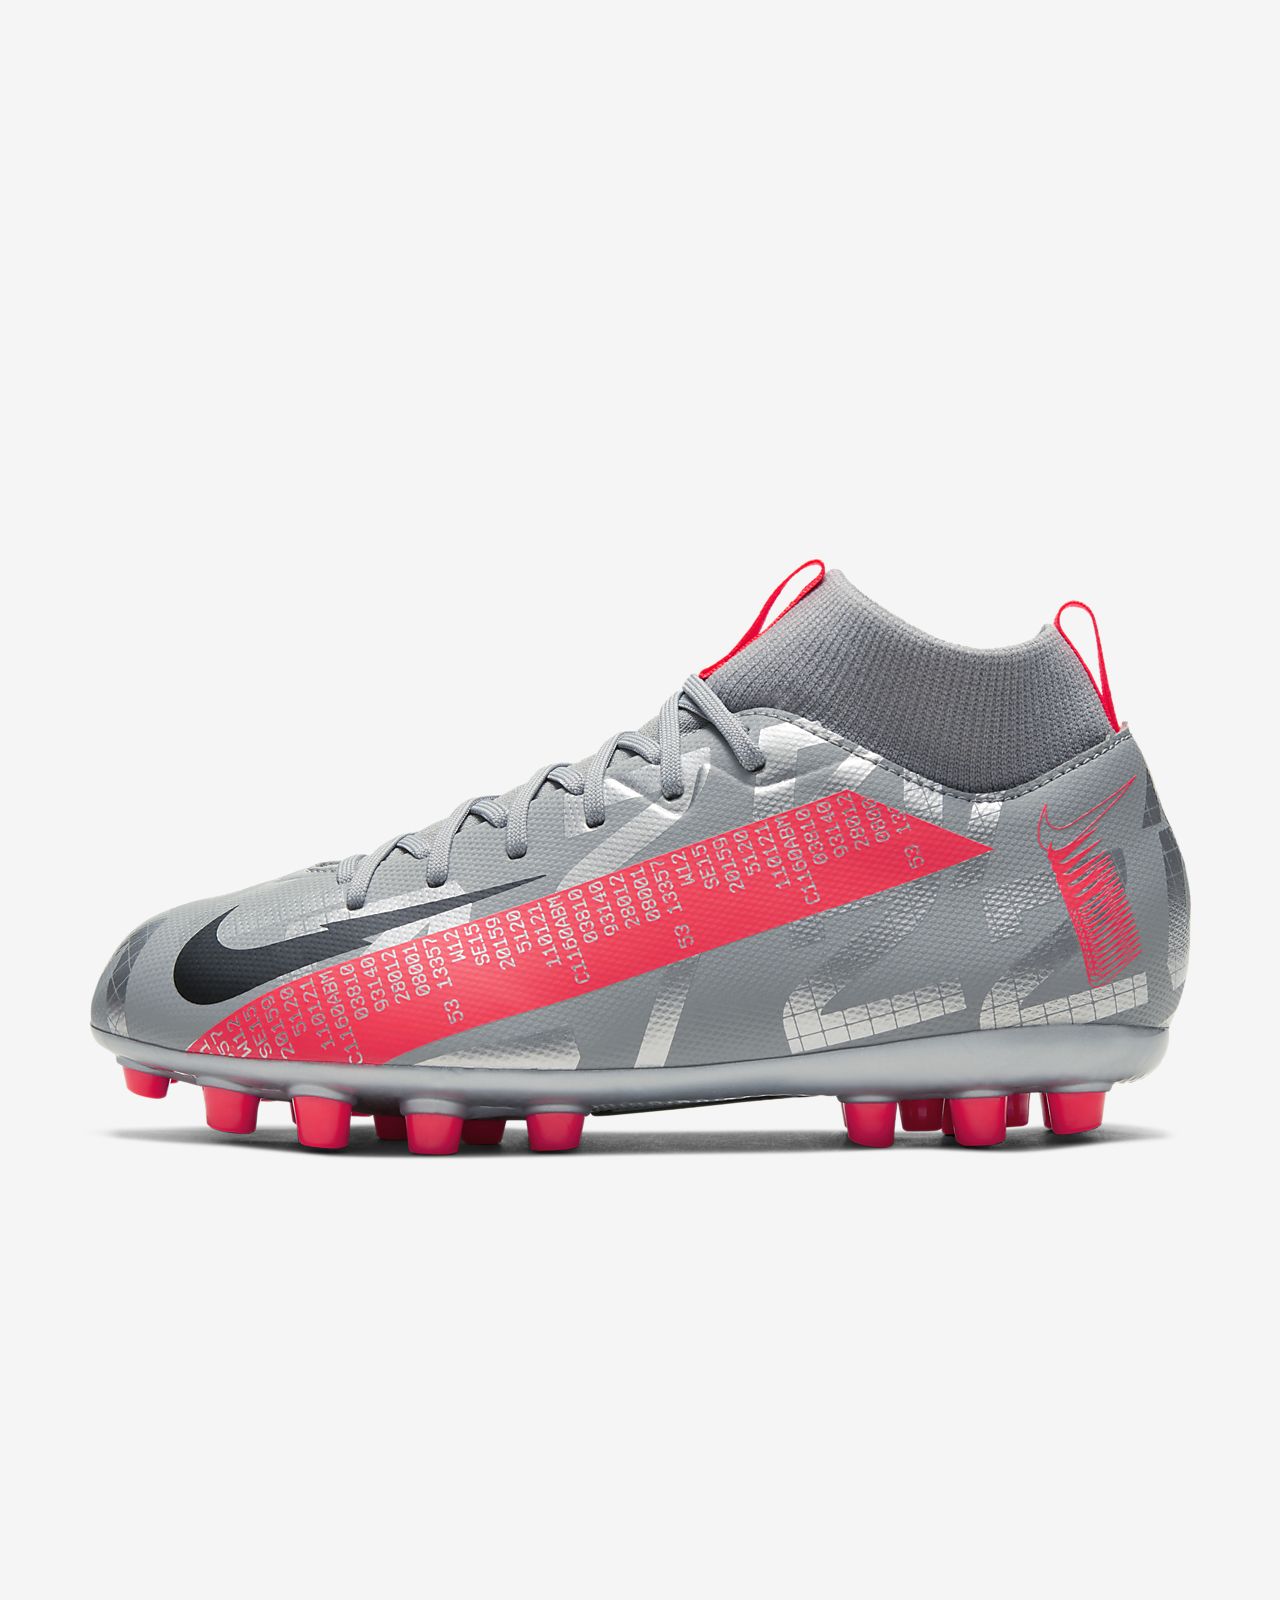 Nike Men 's Superfly 7 Academy IC Football Boots Laser.